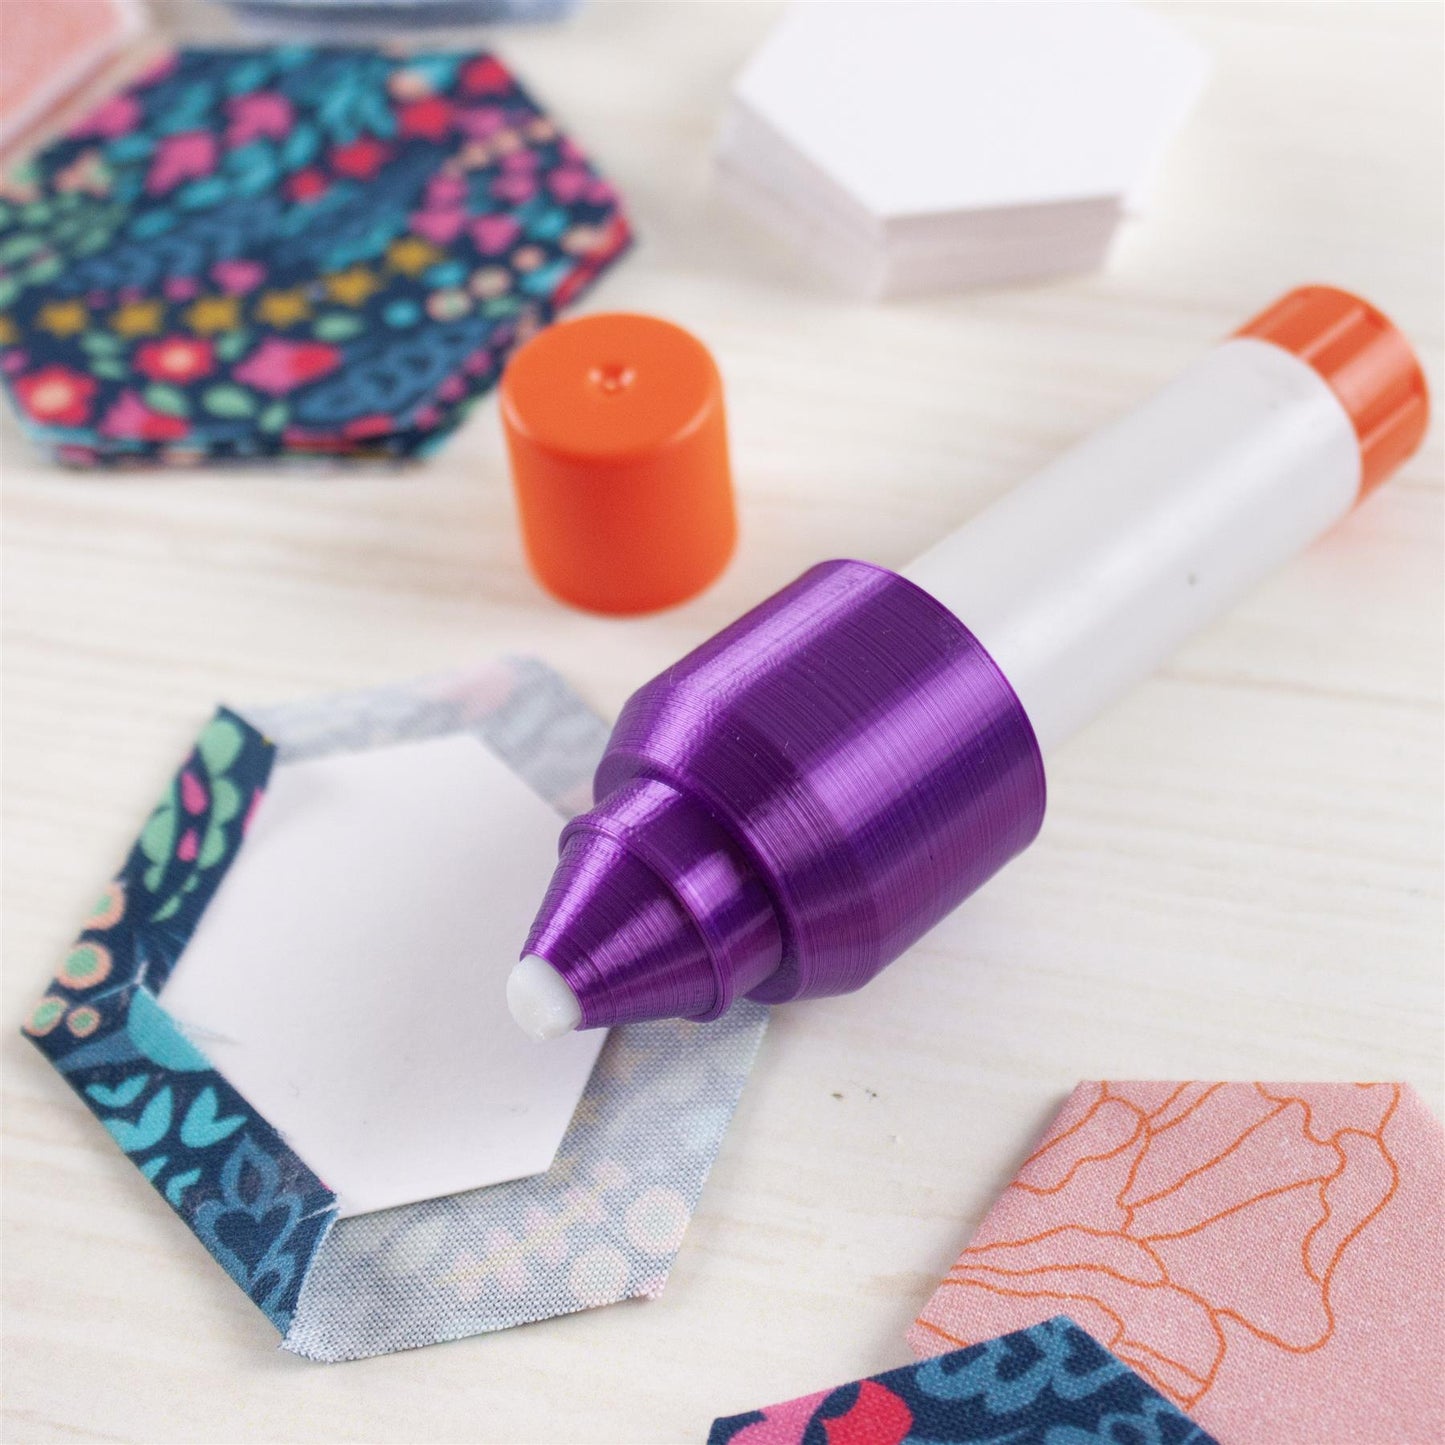 Best Tips For Using Glue Dots!